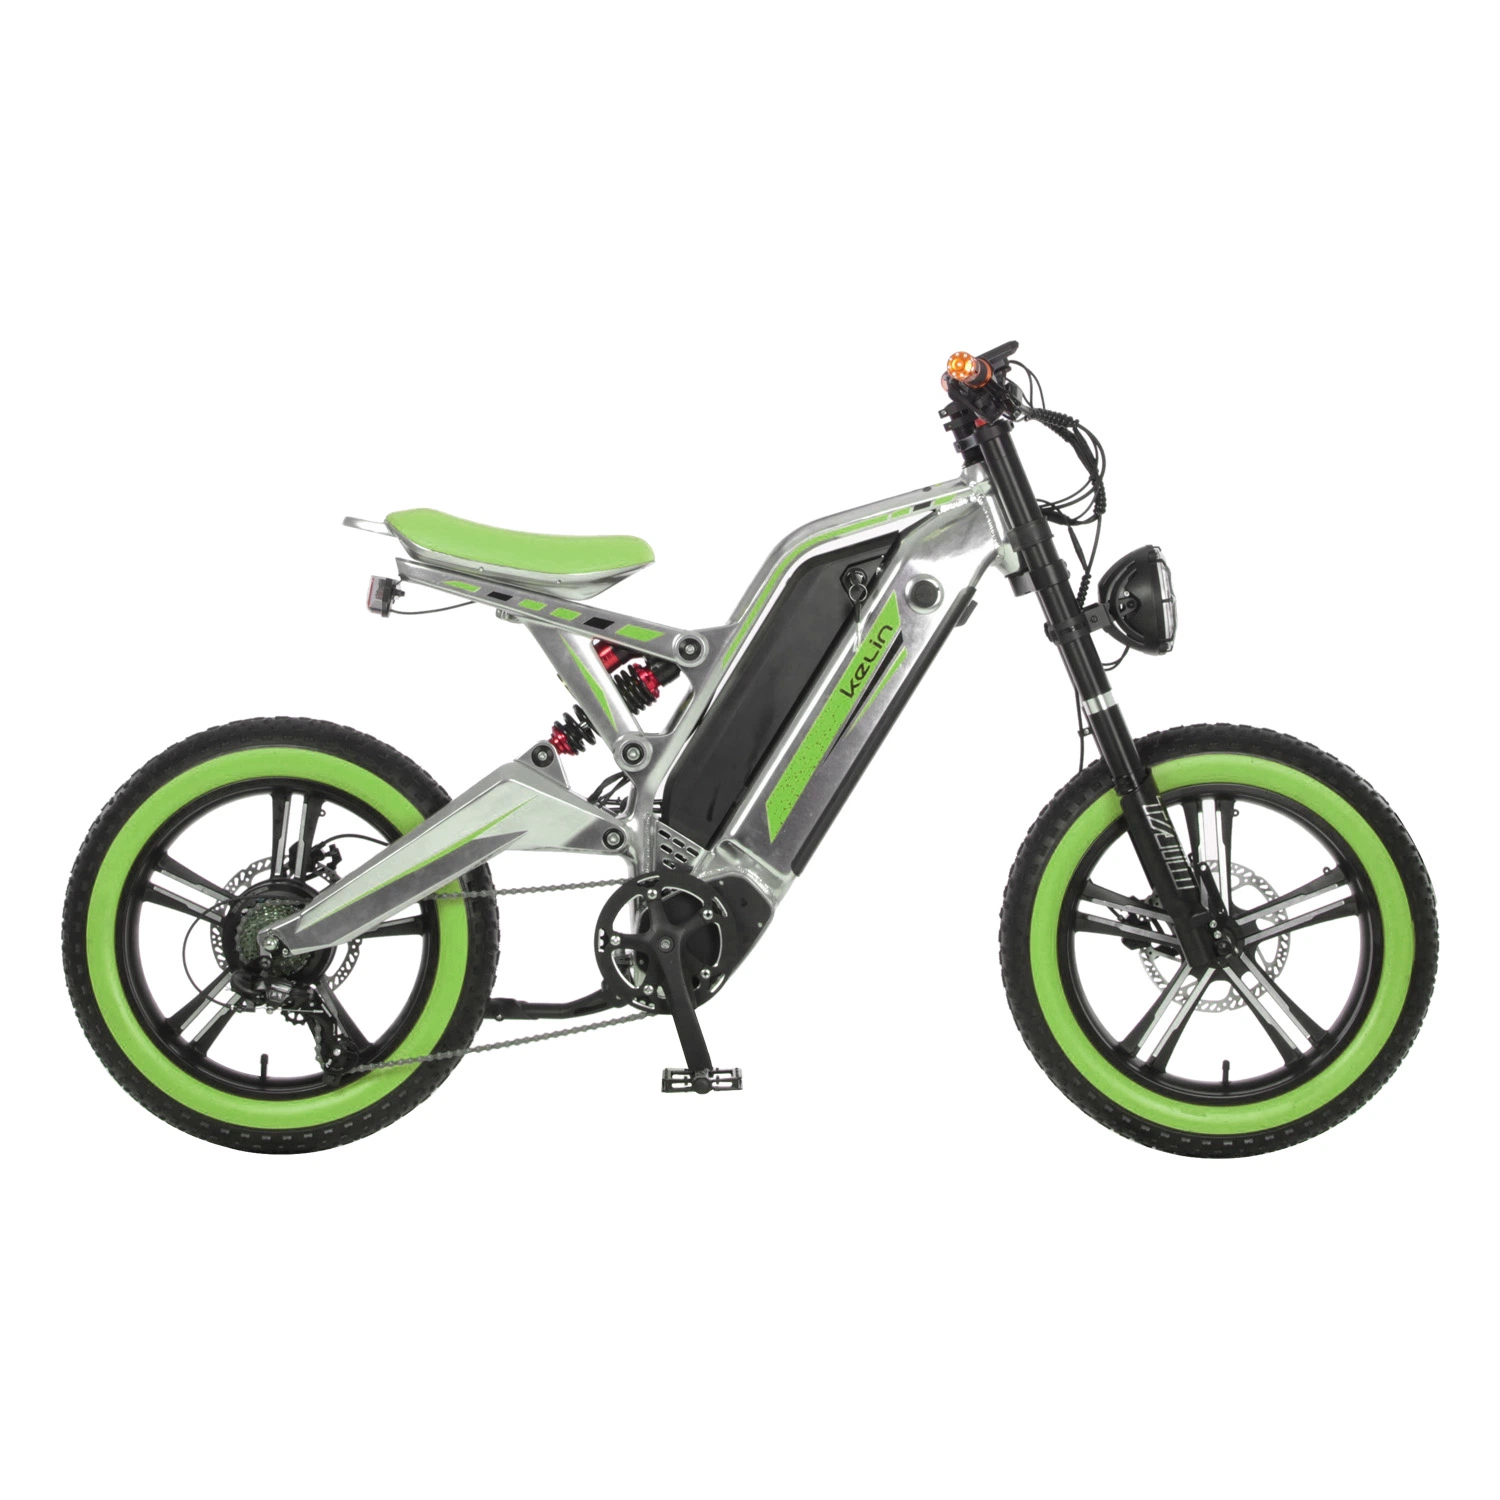 Customizable High Performance Long-Distance New Design Electric Motorcycle